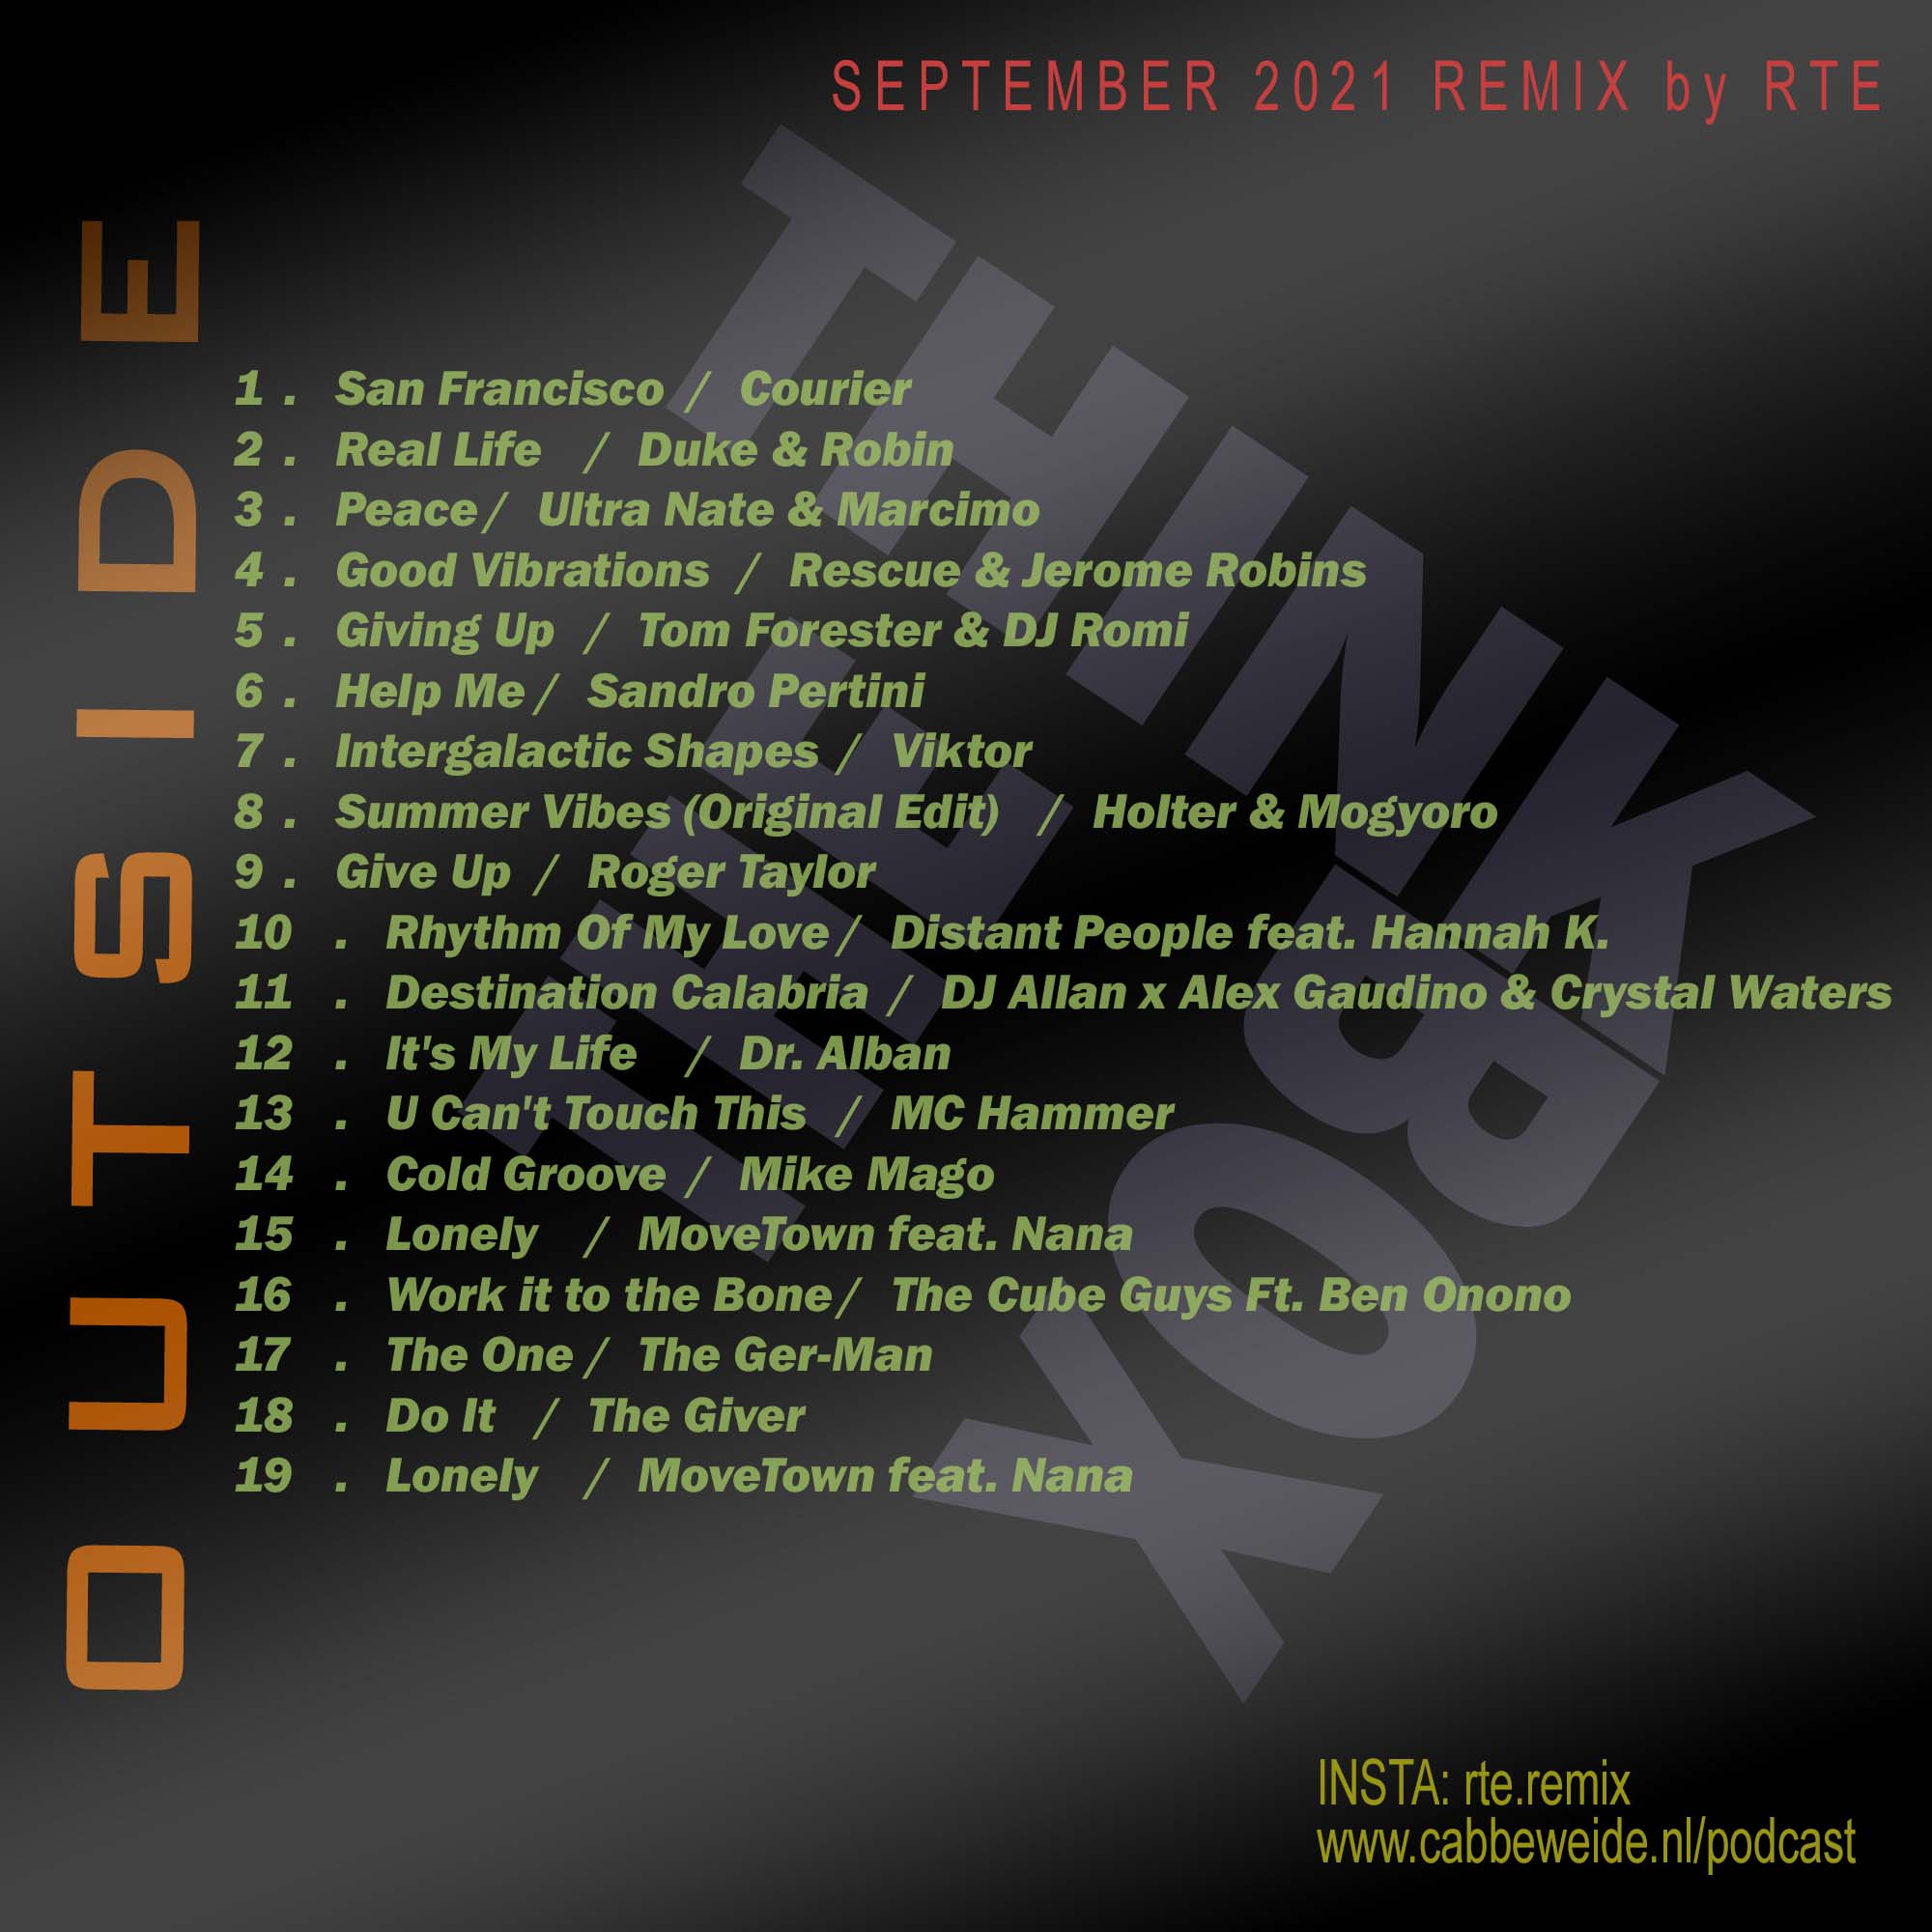 SEPTEMBER 2021 REMIX by RTE